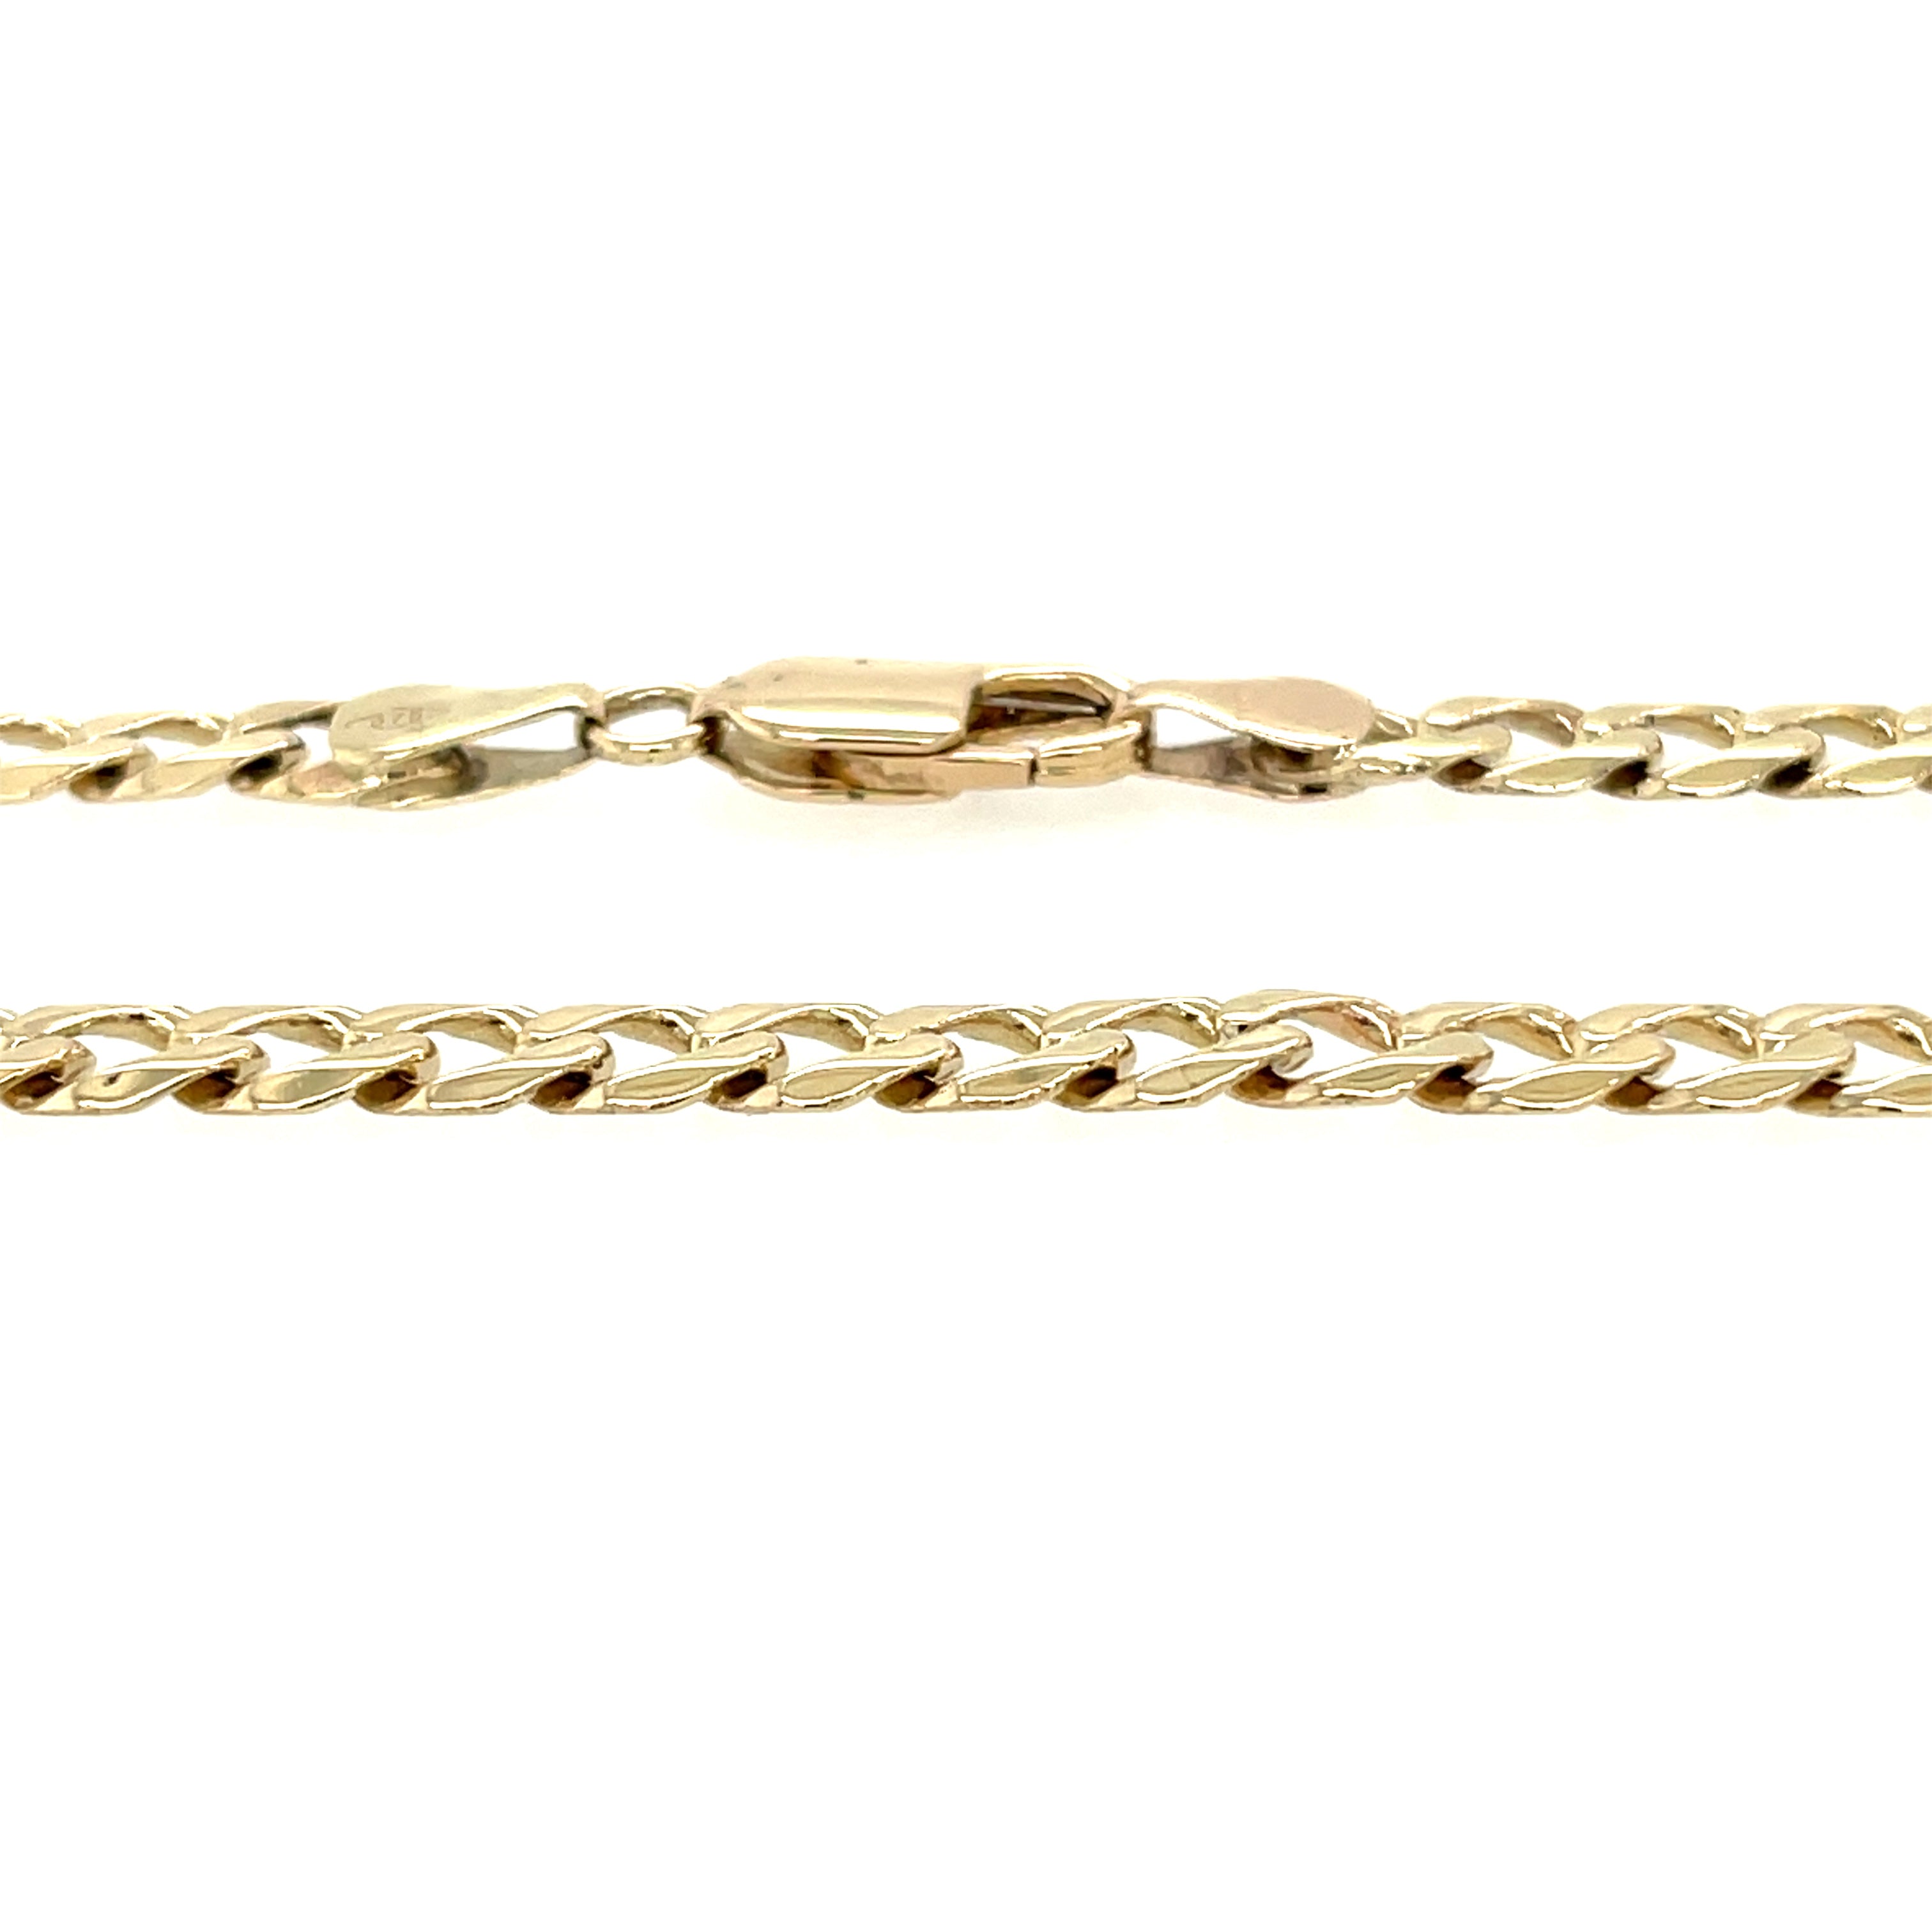 9ct Yellow Gold 19 Inch Curb Link Chain - 18.75g (Copy)